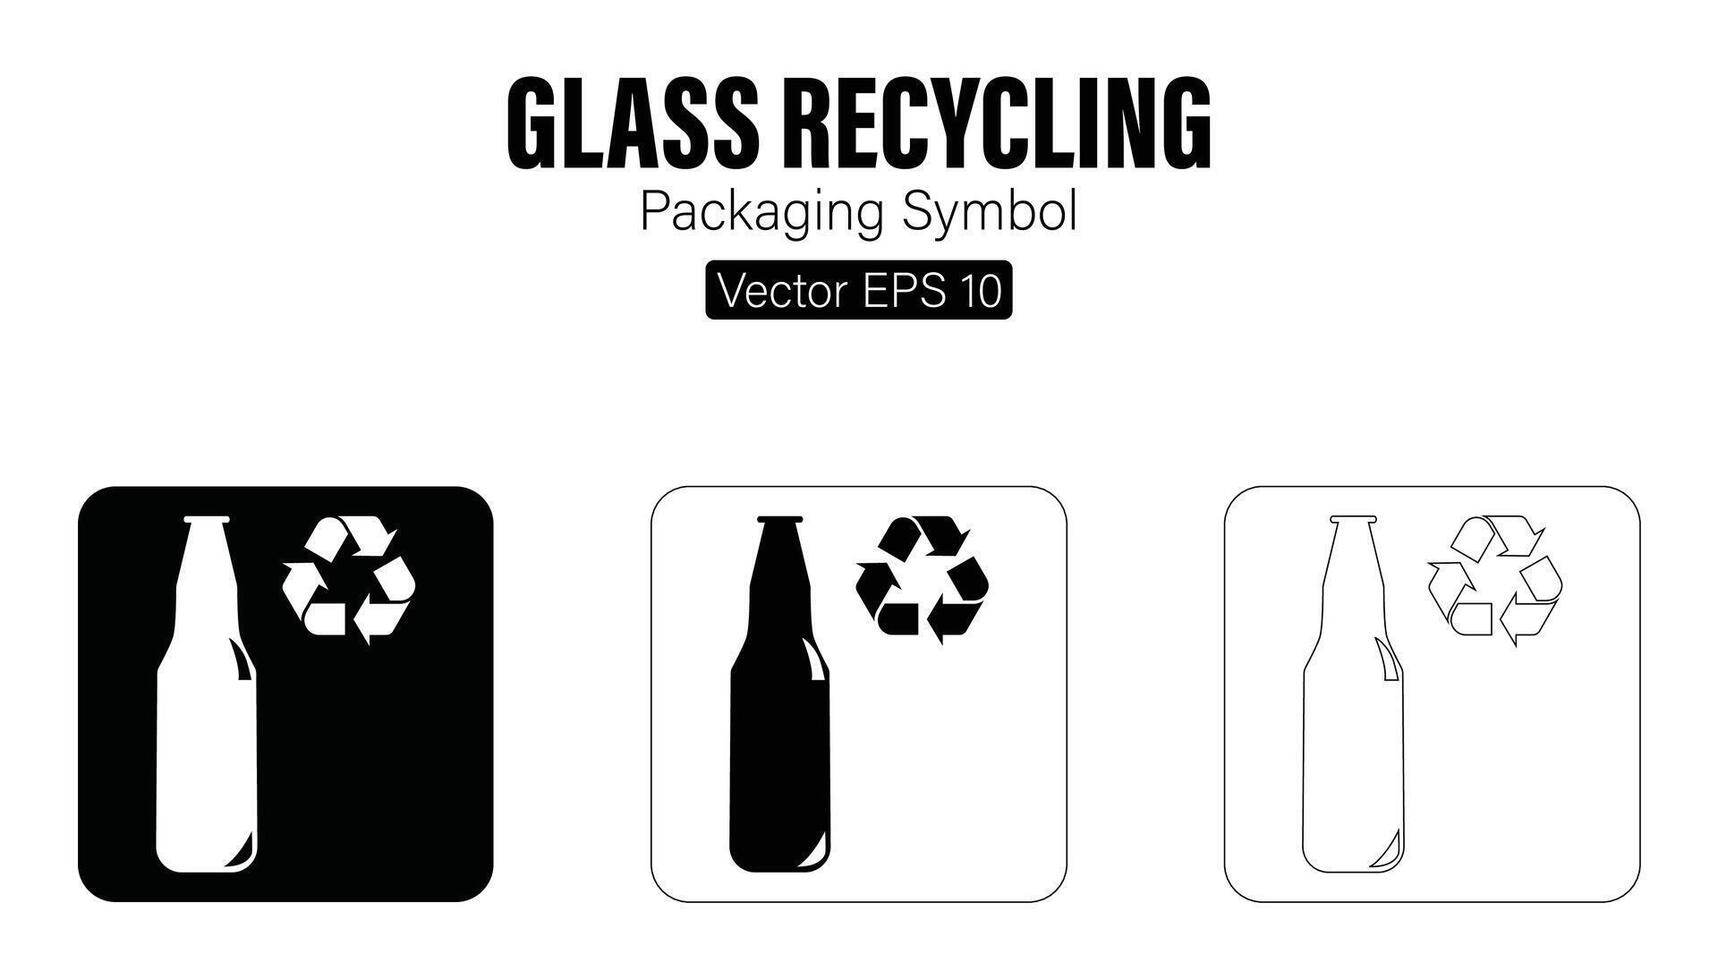 glas recycling verpakking symbool vector